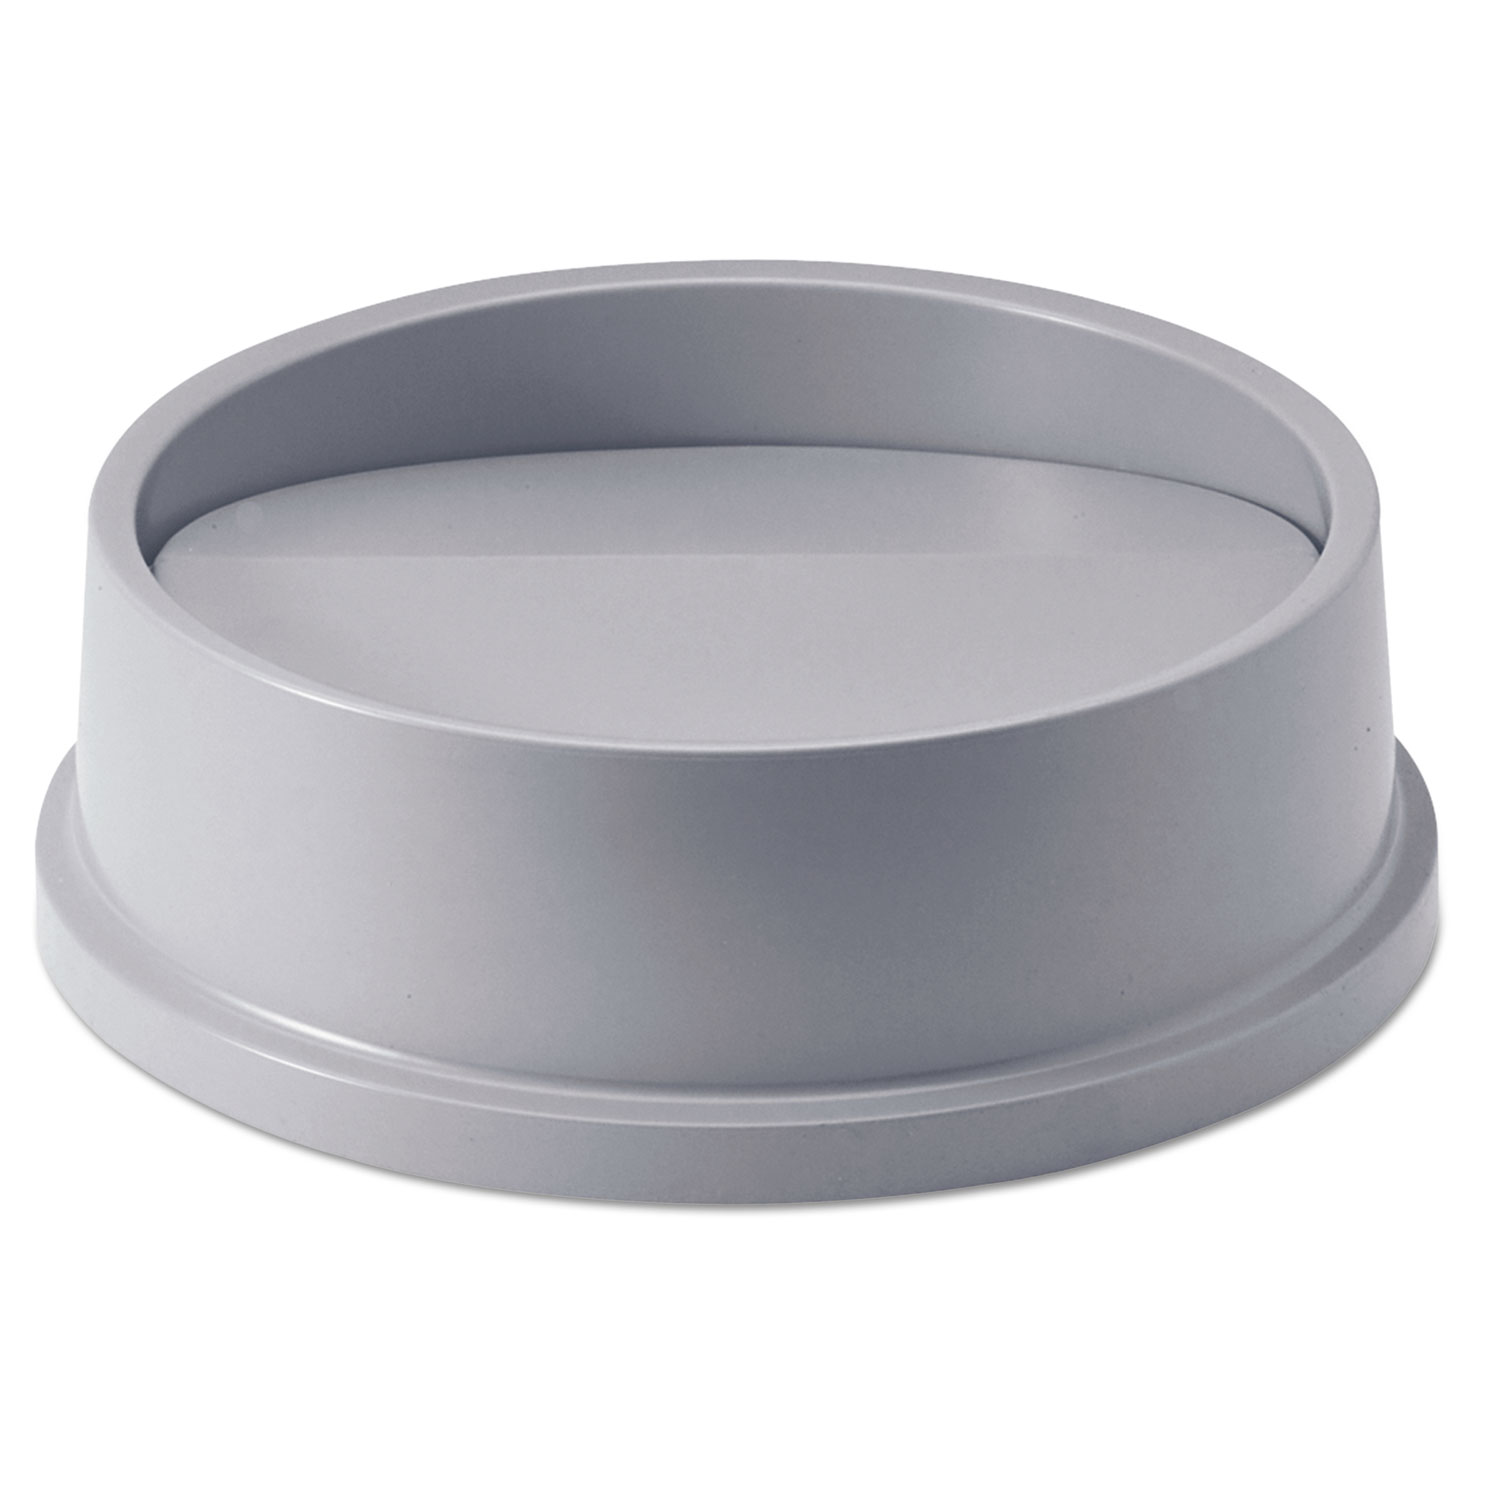 Swing Top Lid for Round Waste Container, Plastic, Gray